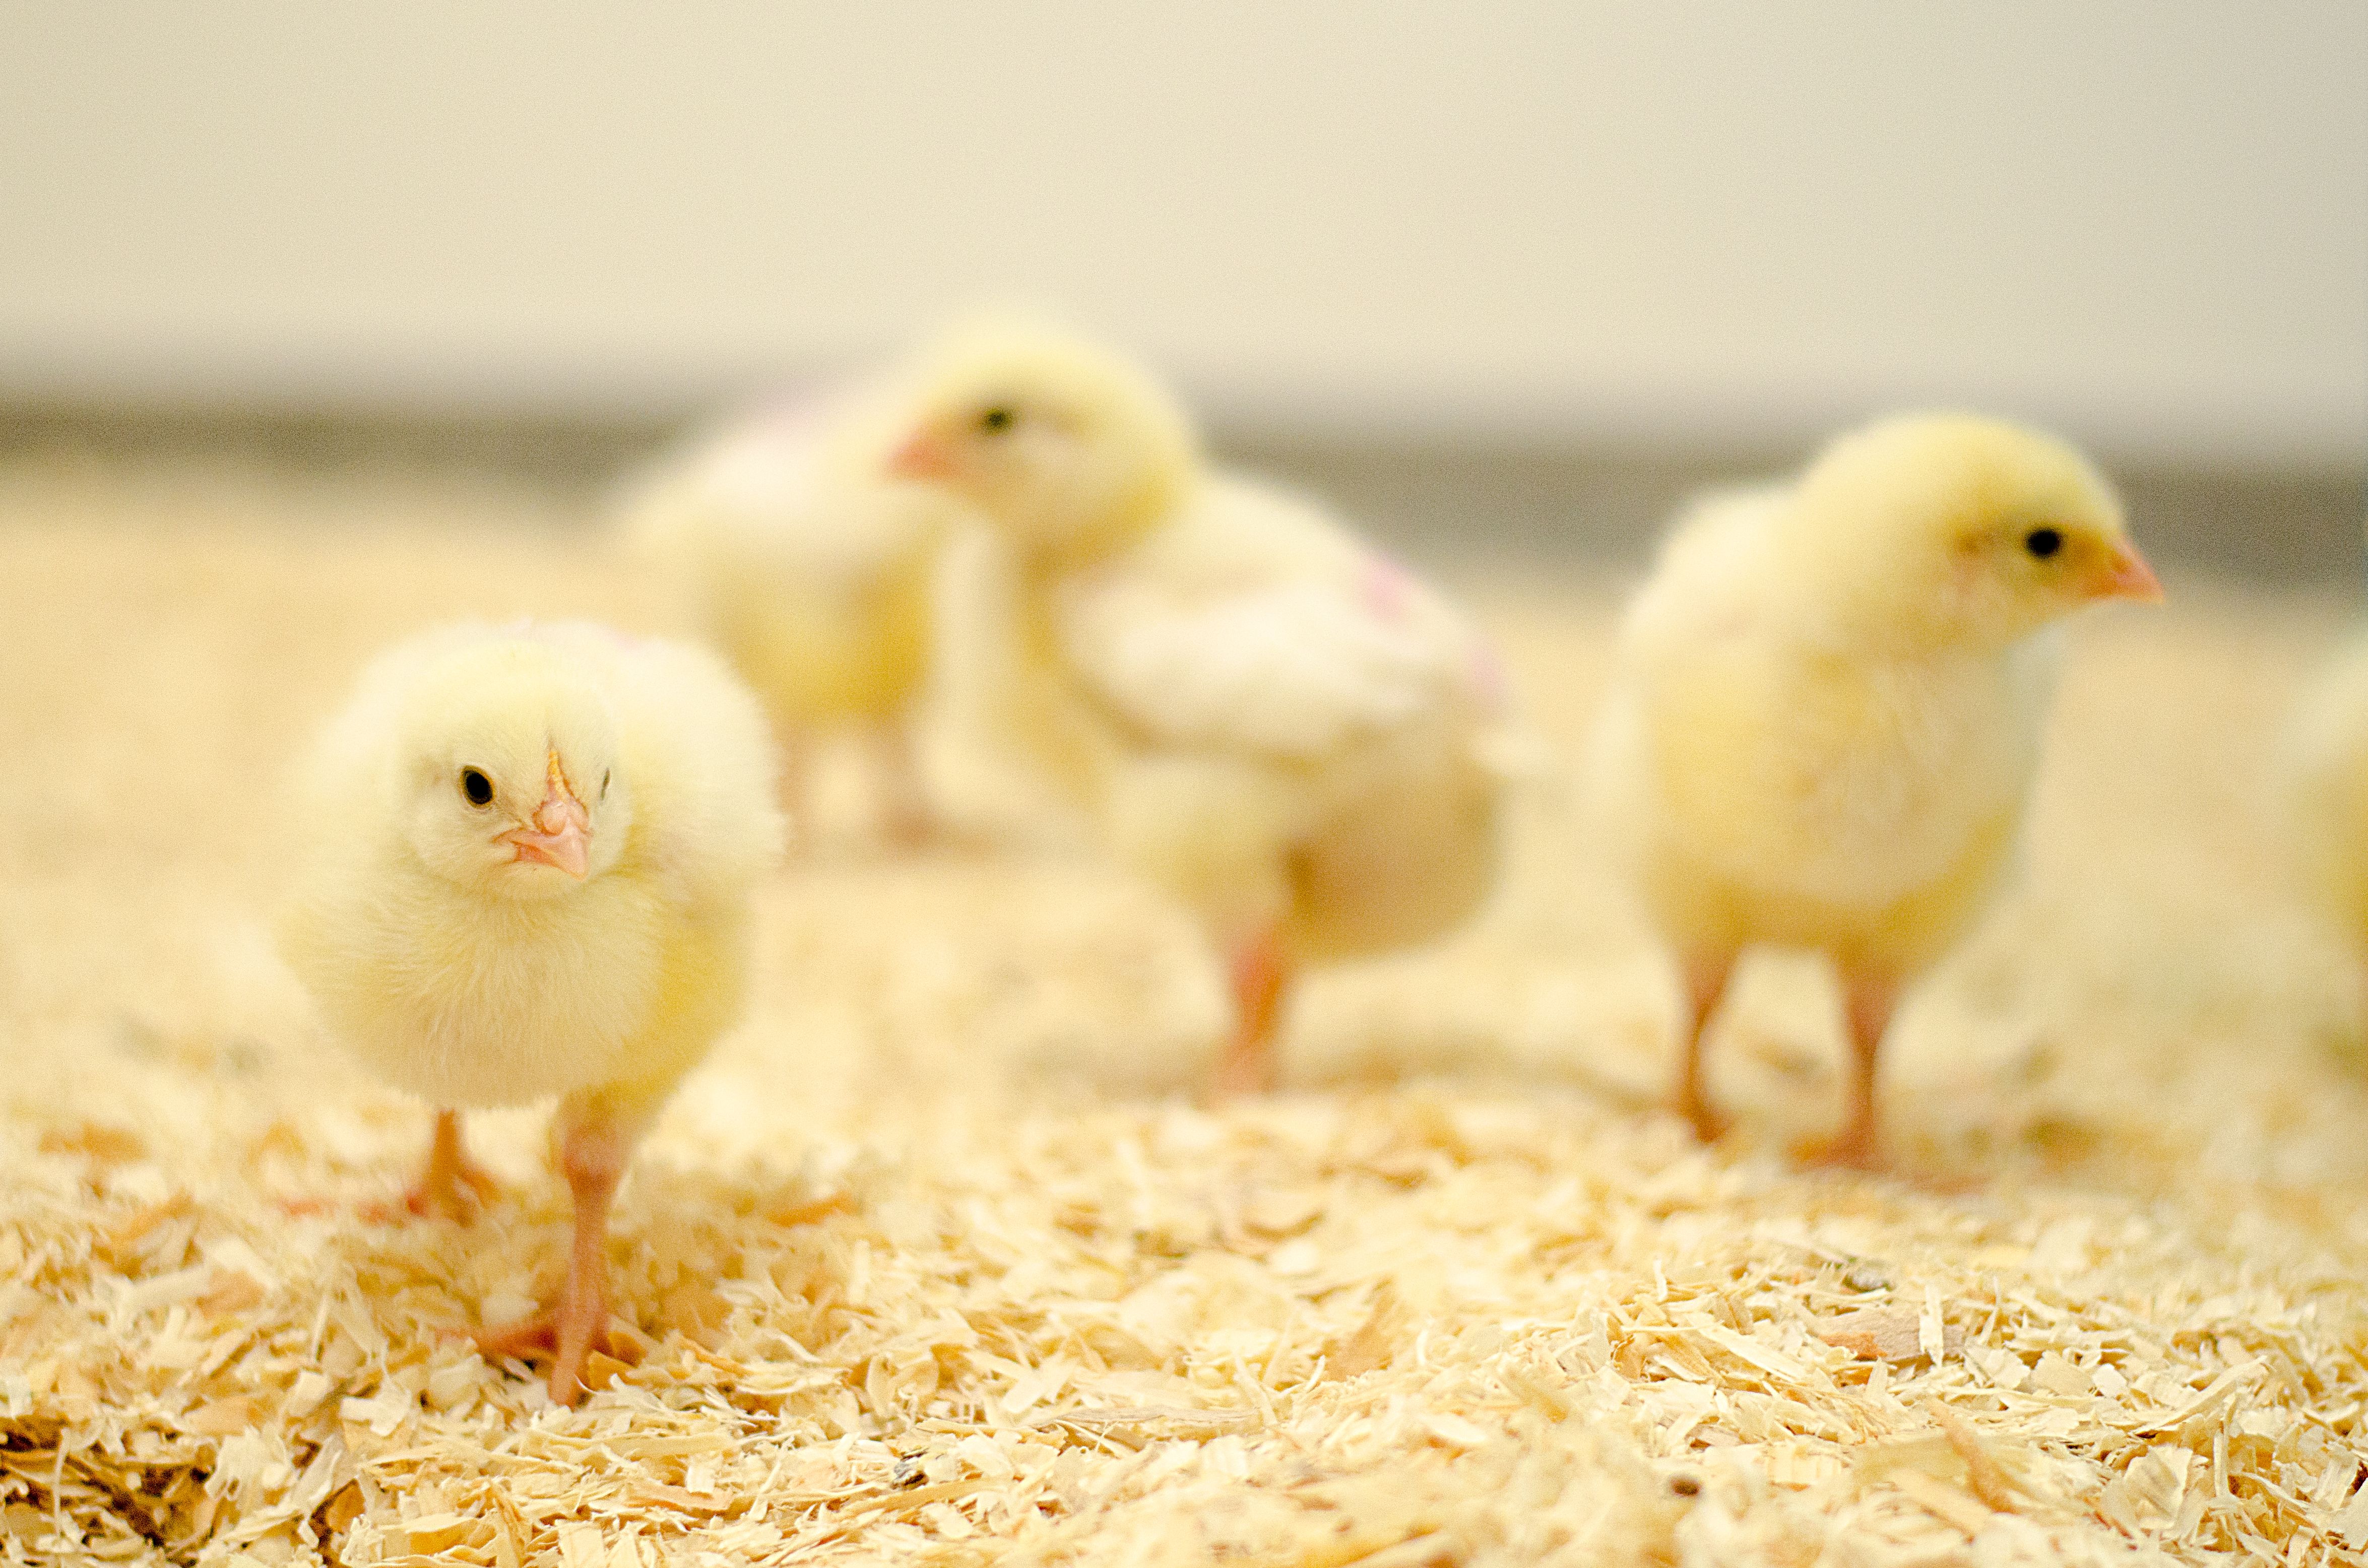 Image - Simple way of ‘listening’ to chicks could dramatically improve welfare